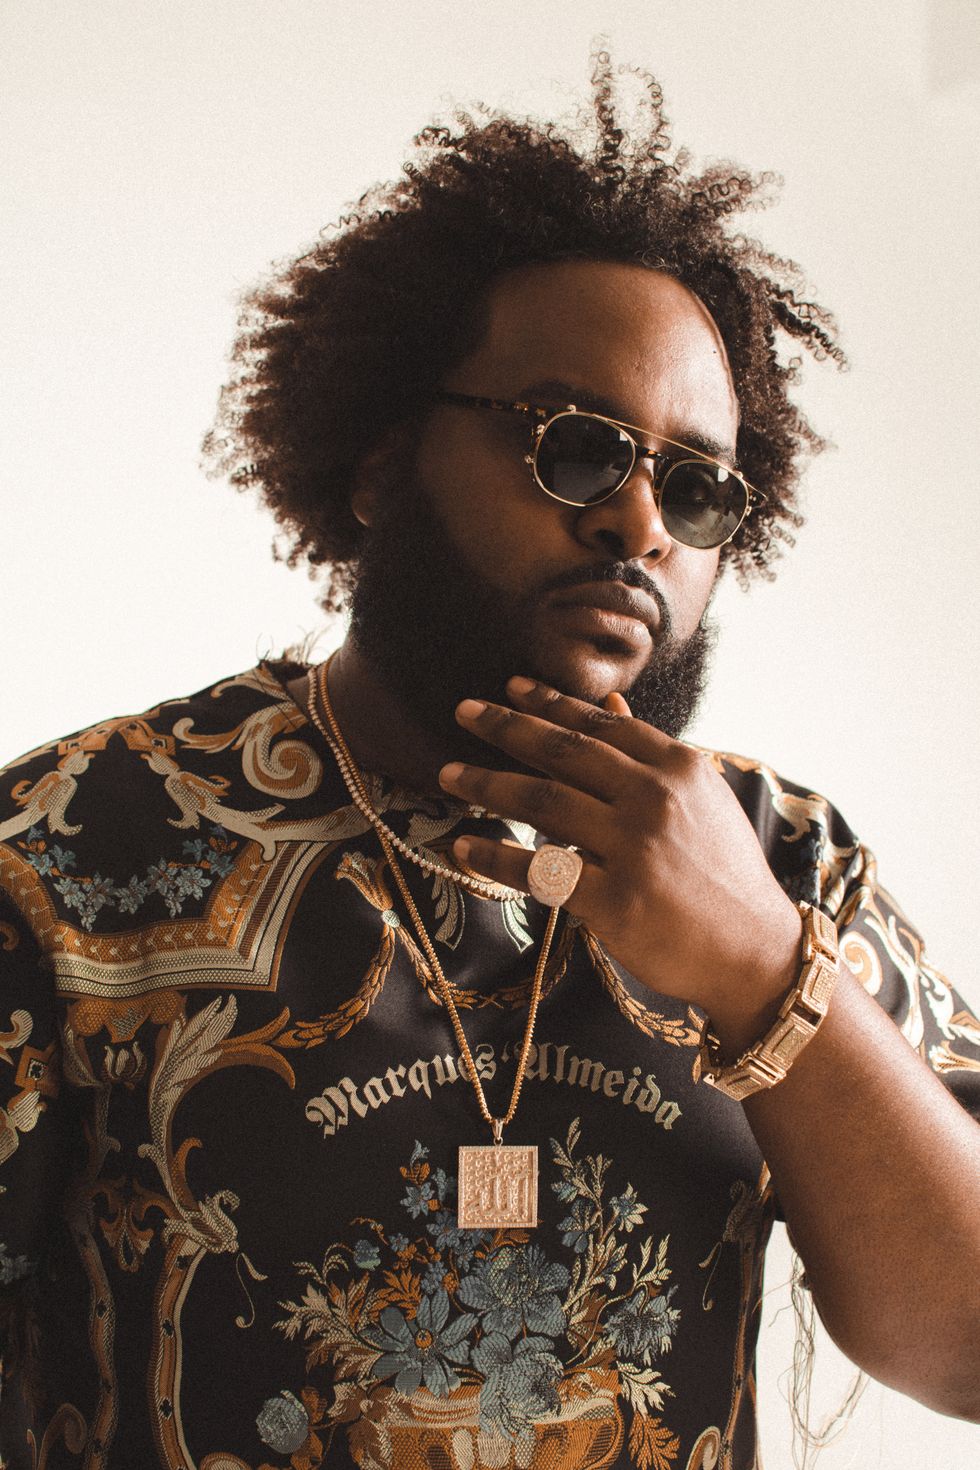 Bas: ​"I Was Born in France & Raised in New York But I'm Still African"